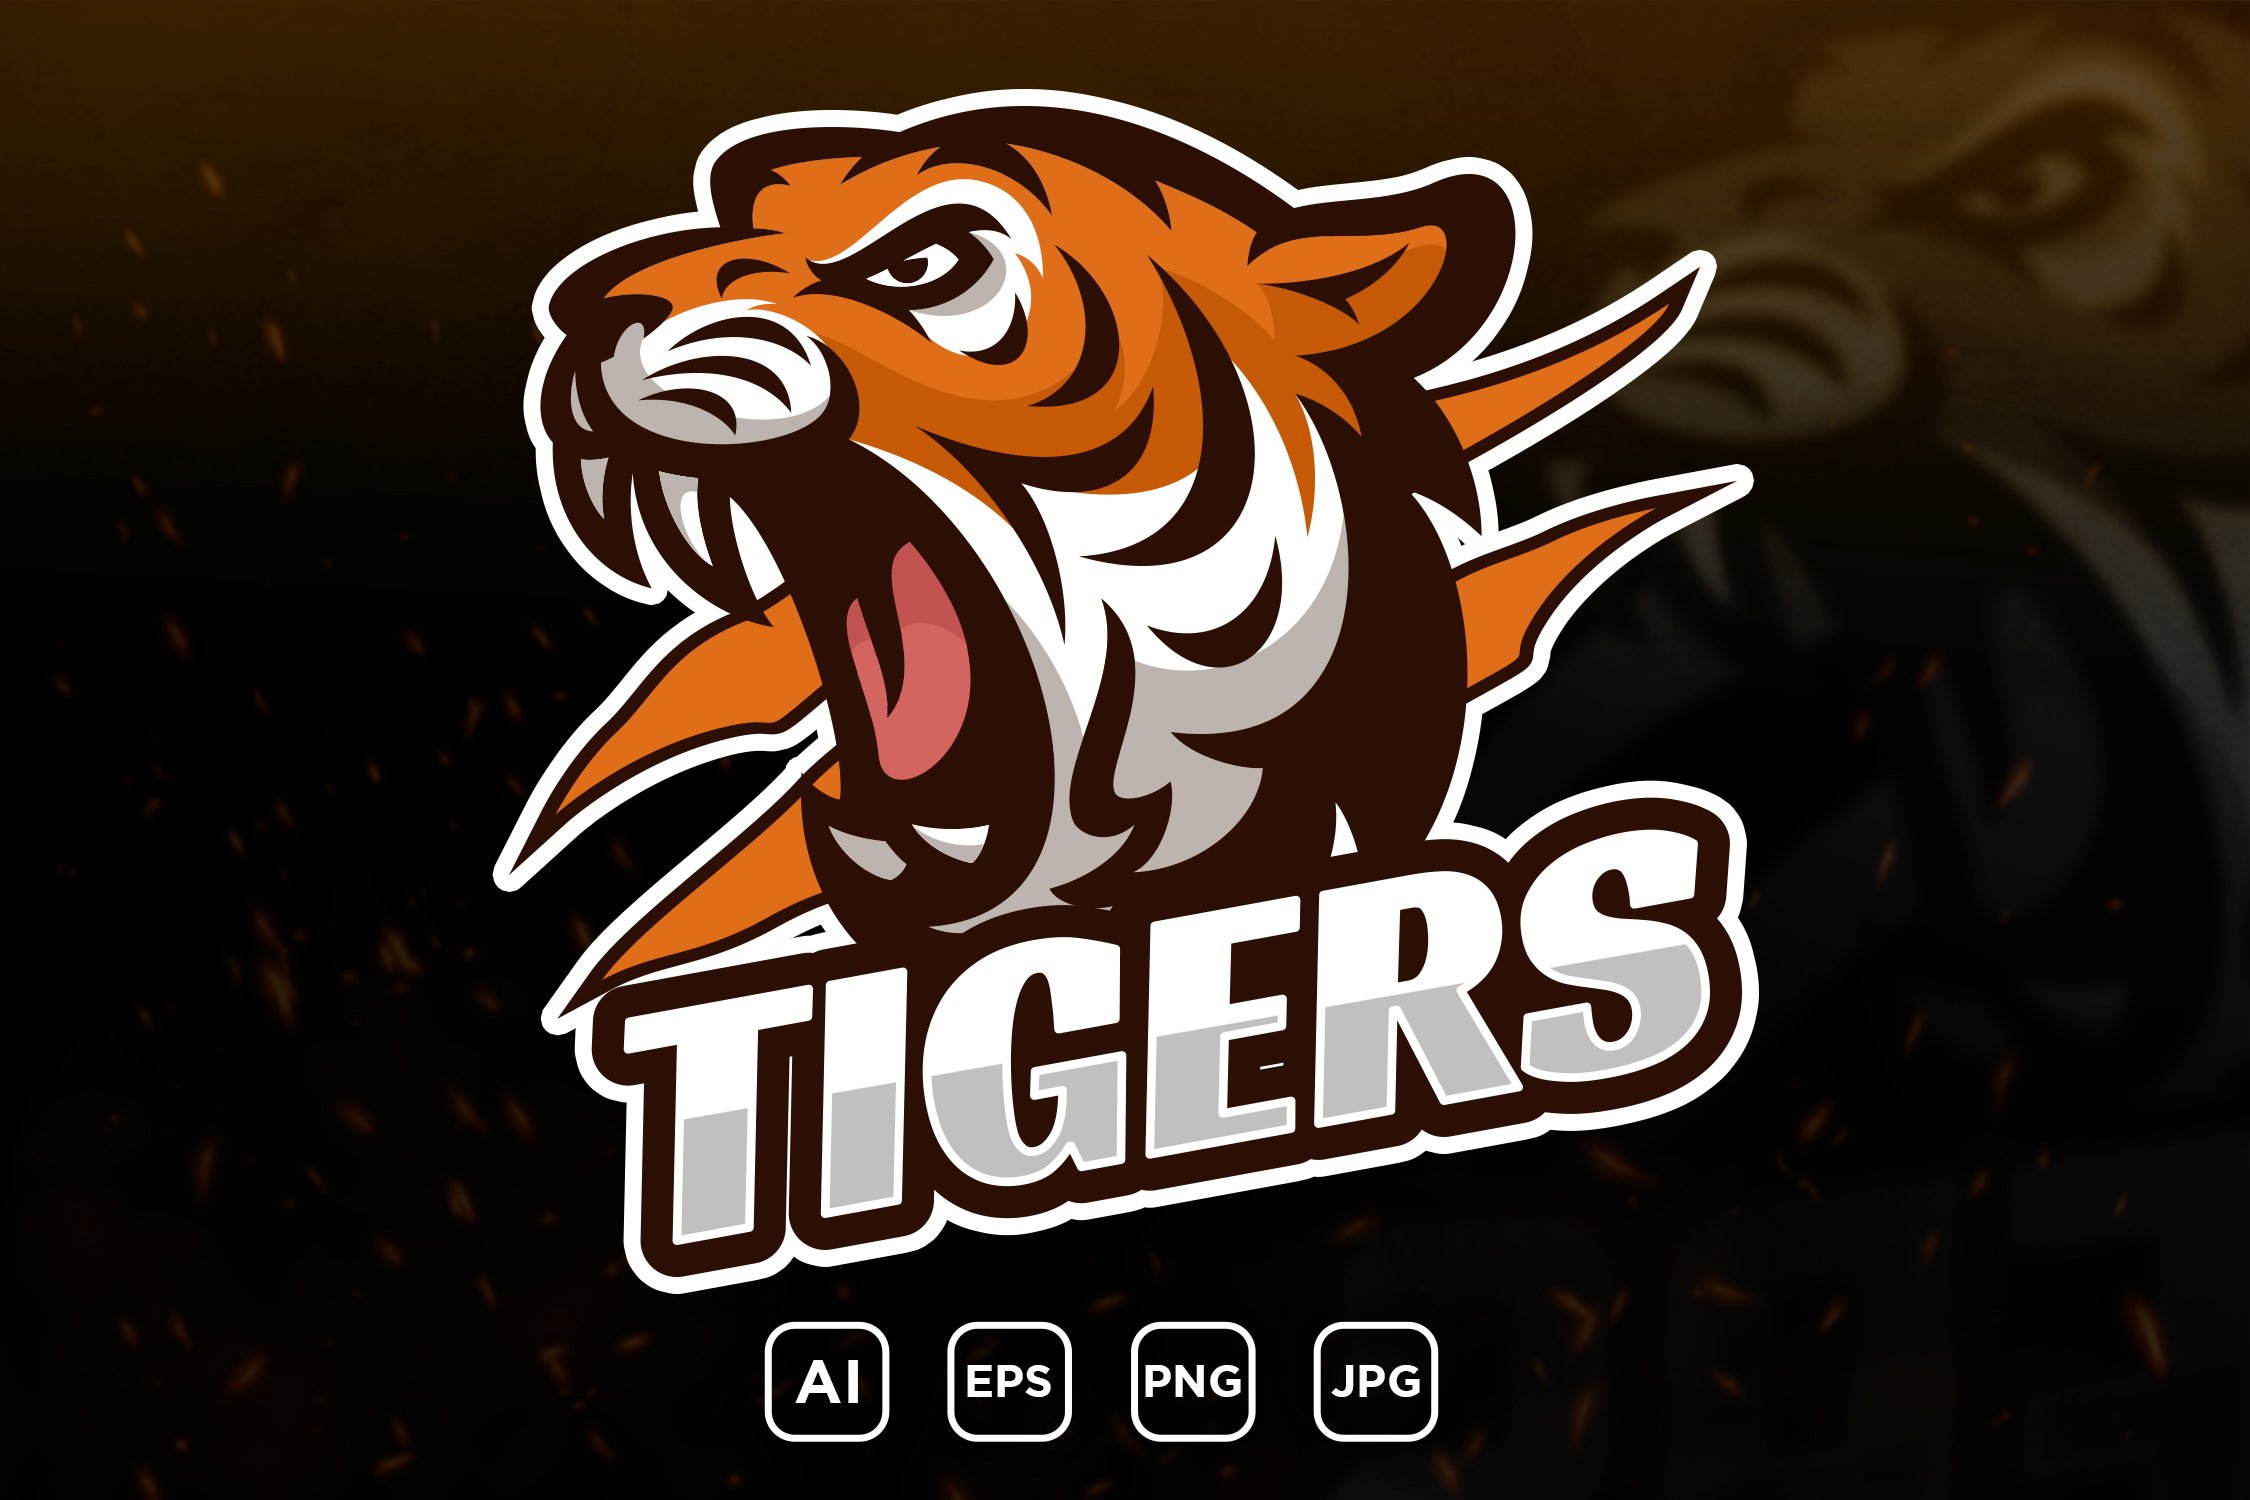 Tiger - mascot logo for a team cover image.